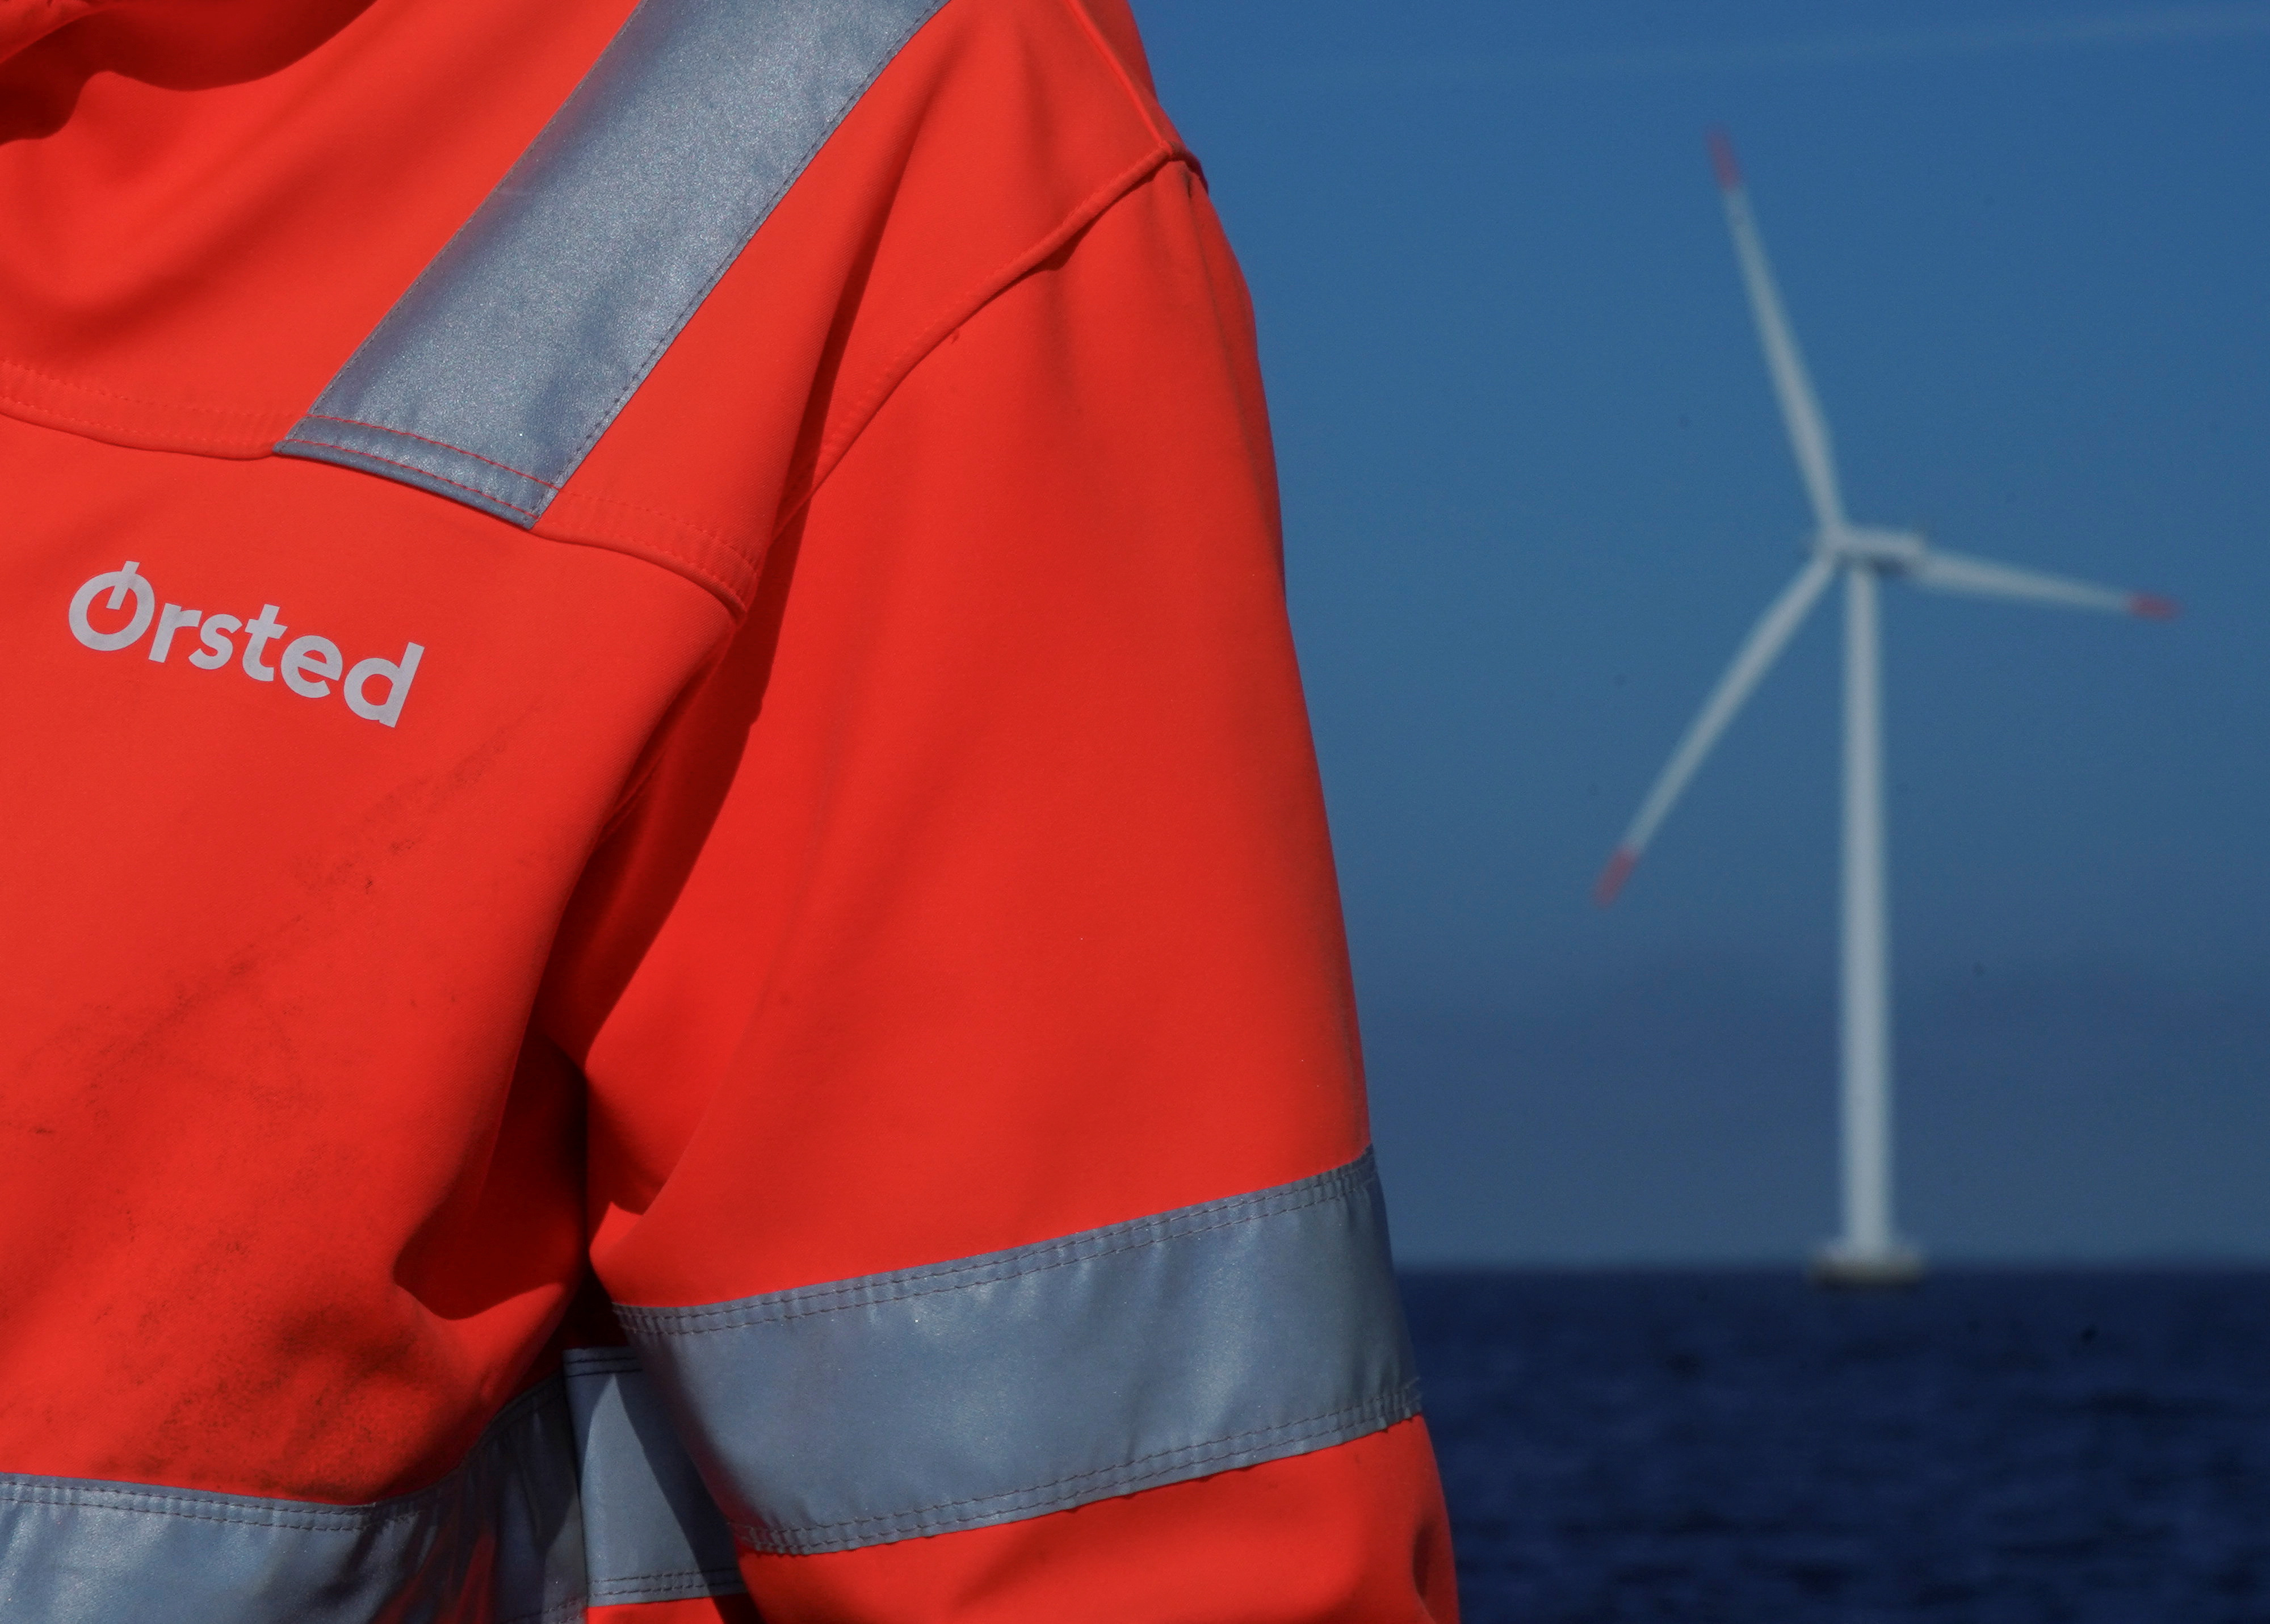 S&P downgrades Danish wind power firm Orsted on U.S. offshore